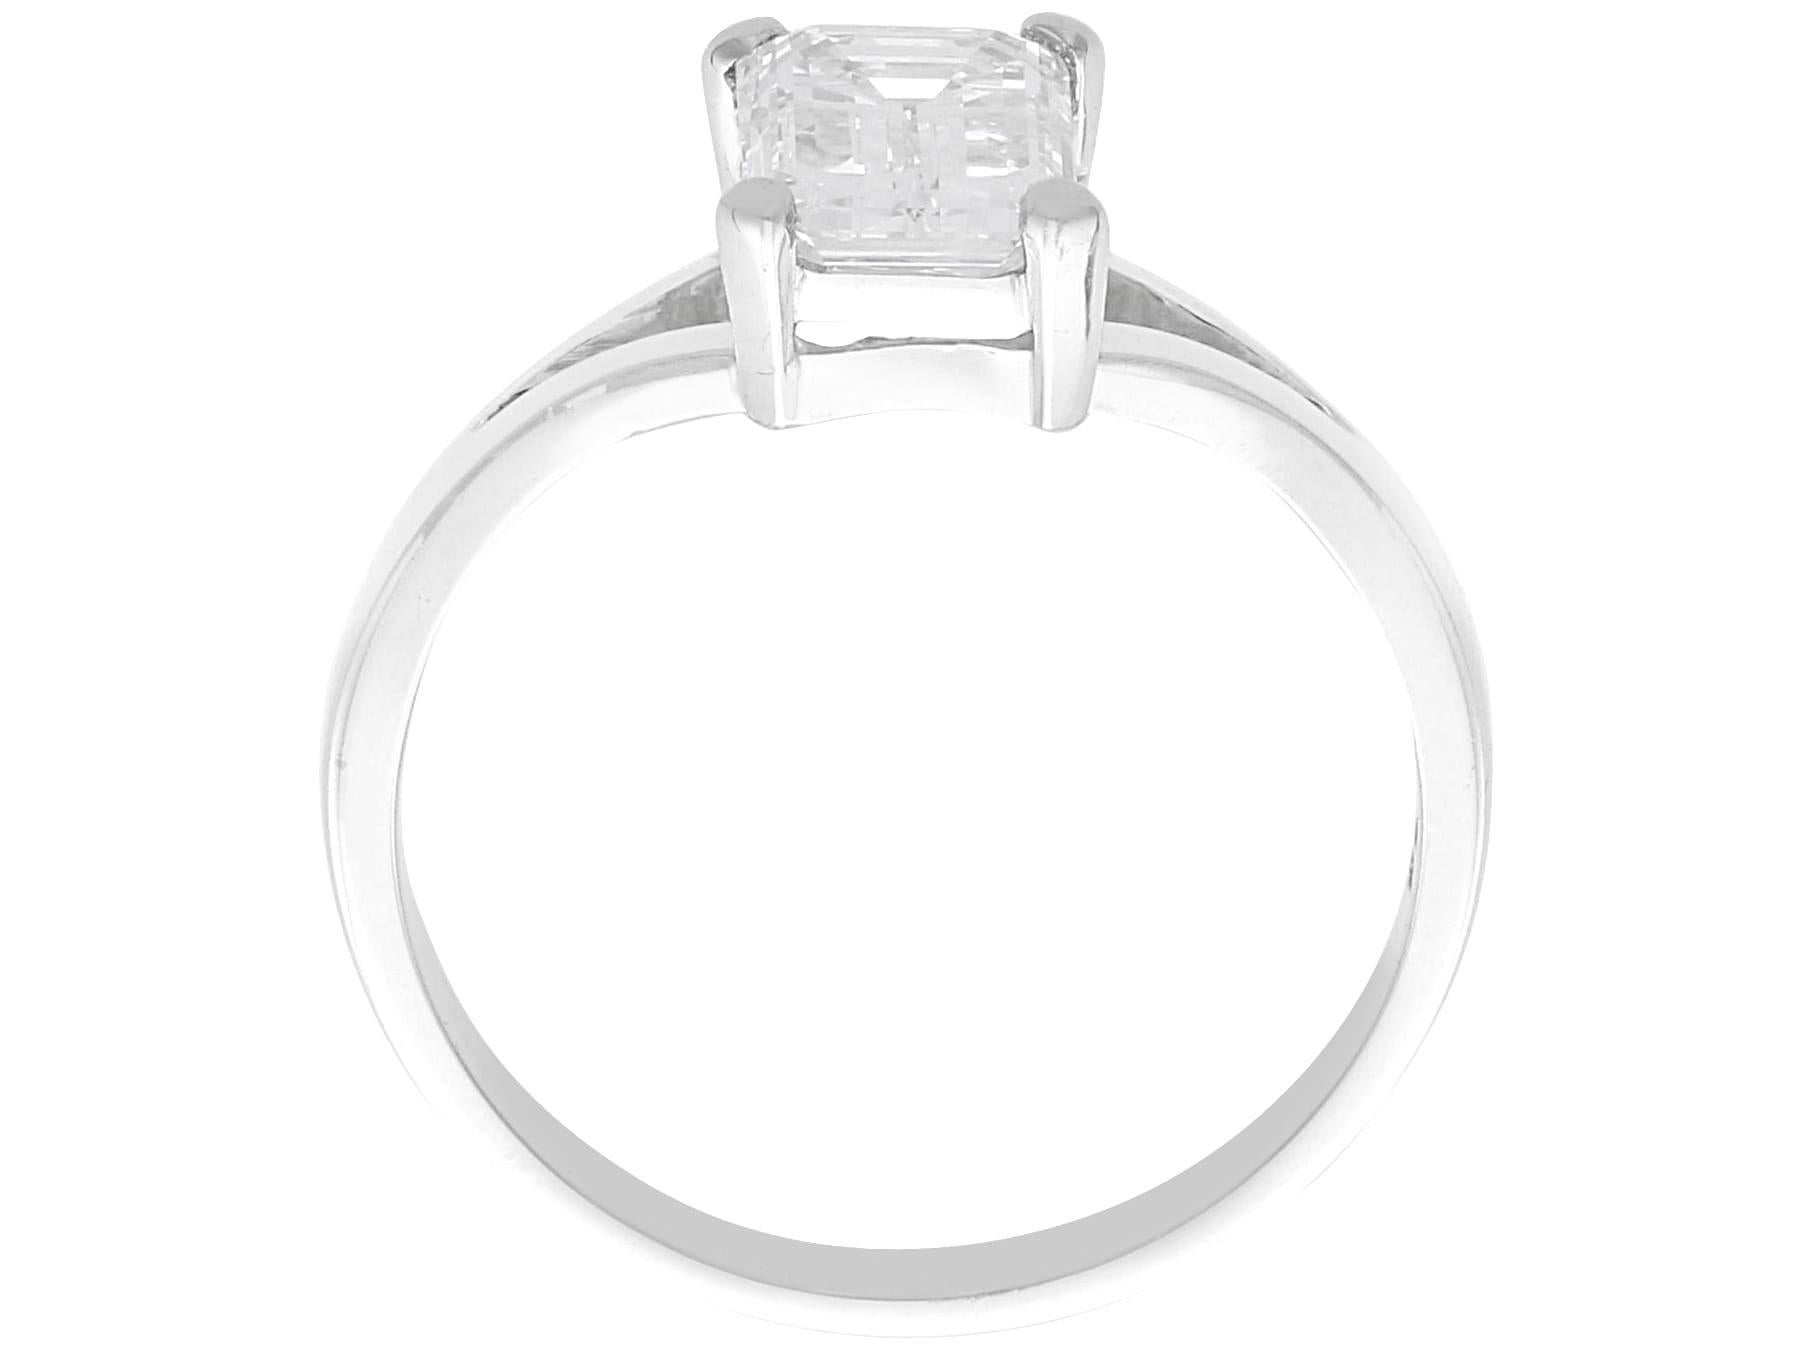 Vintage 1.21 Carat Diamond and White Gold Solitaire Ring For Sale 1